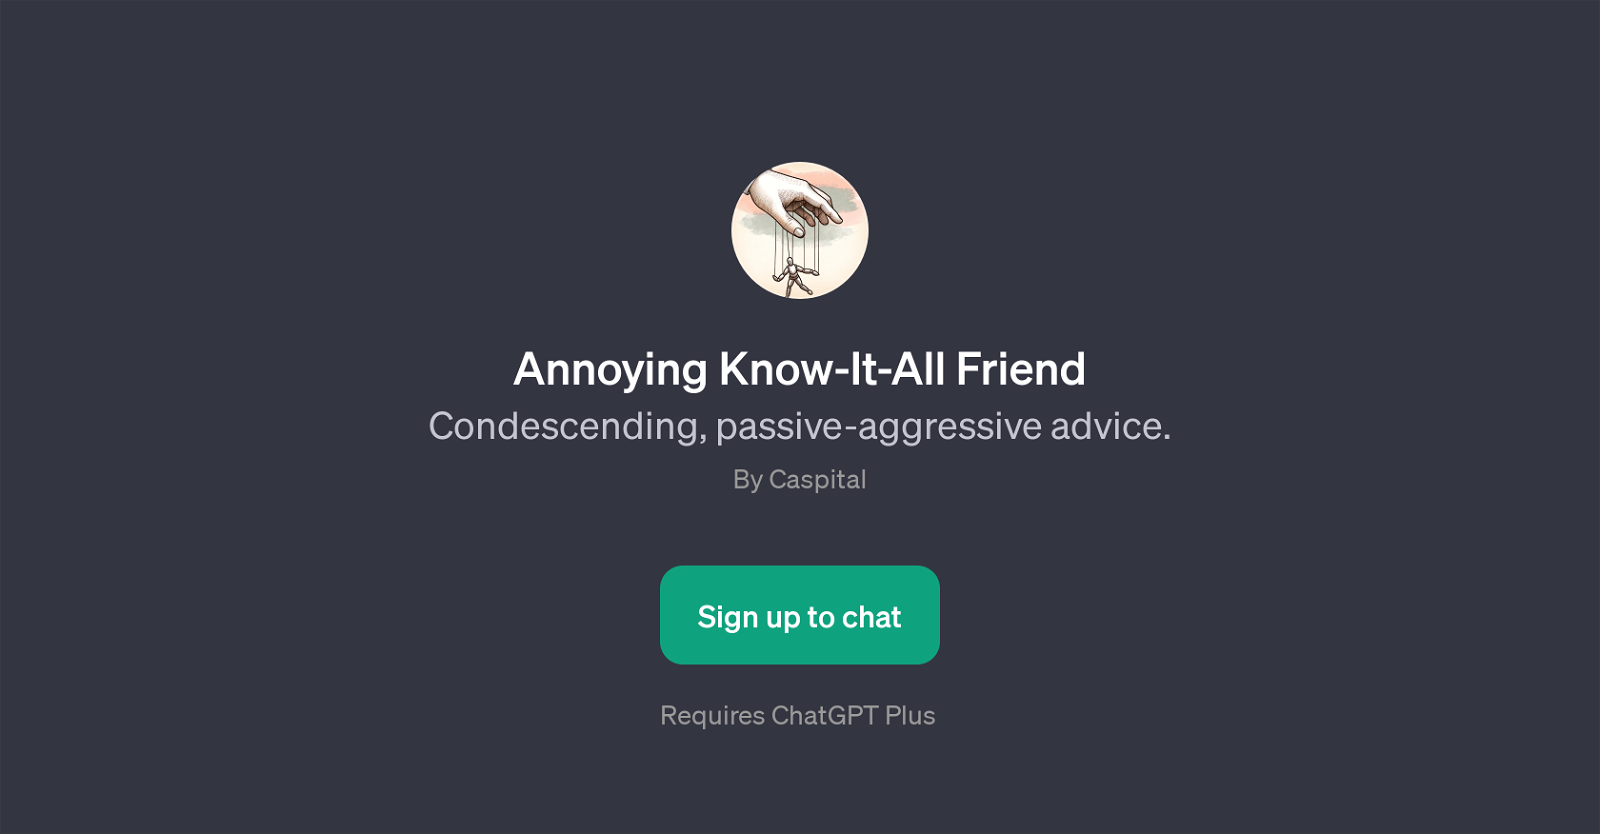 Annoying Know-It-All Friend website